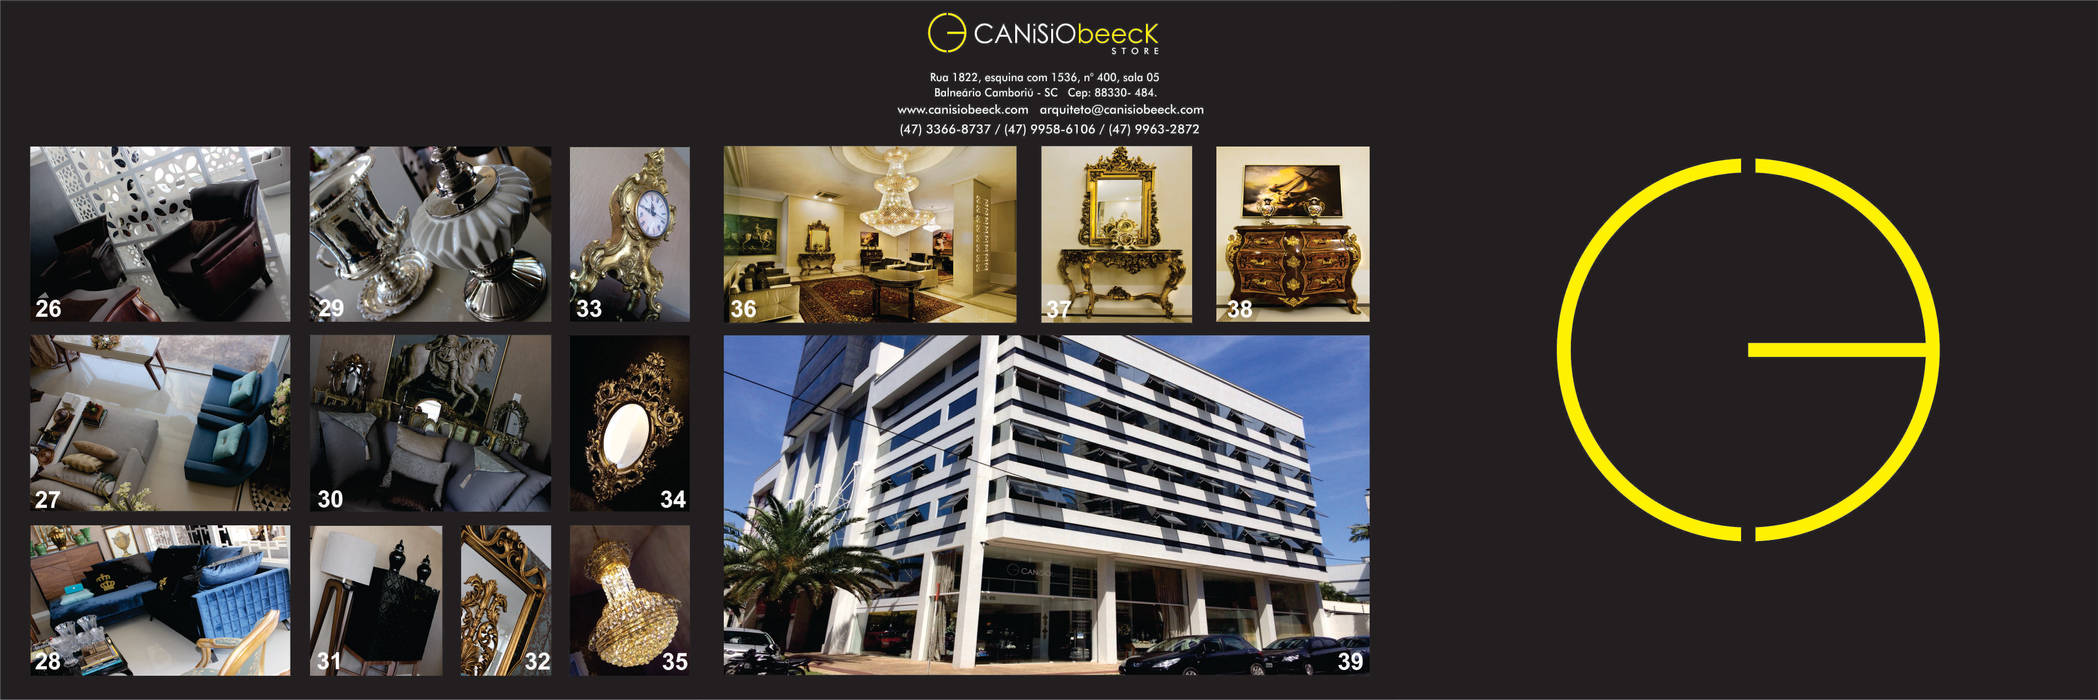 CANISIObeecK STORE, Canisio Beeck Arquiteto Canisio Beeck Arquiteto Espaços comerciais Lojas e imóveis comerciais